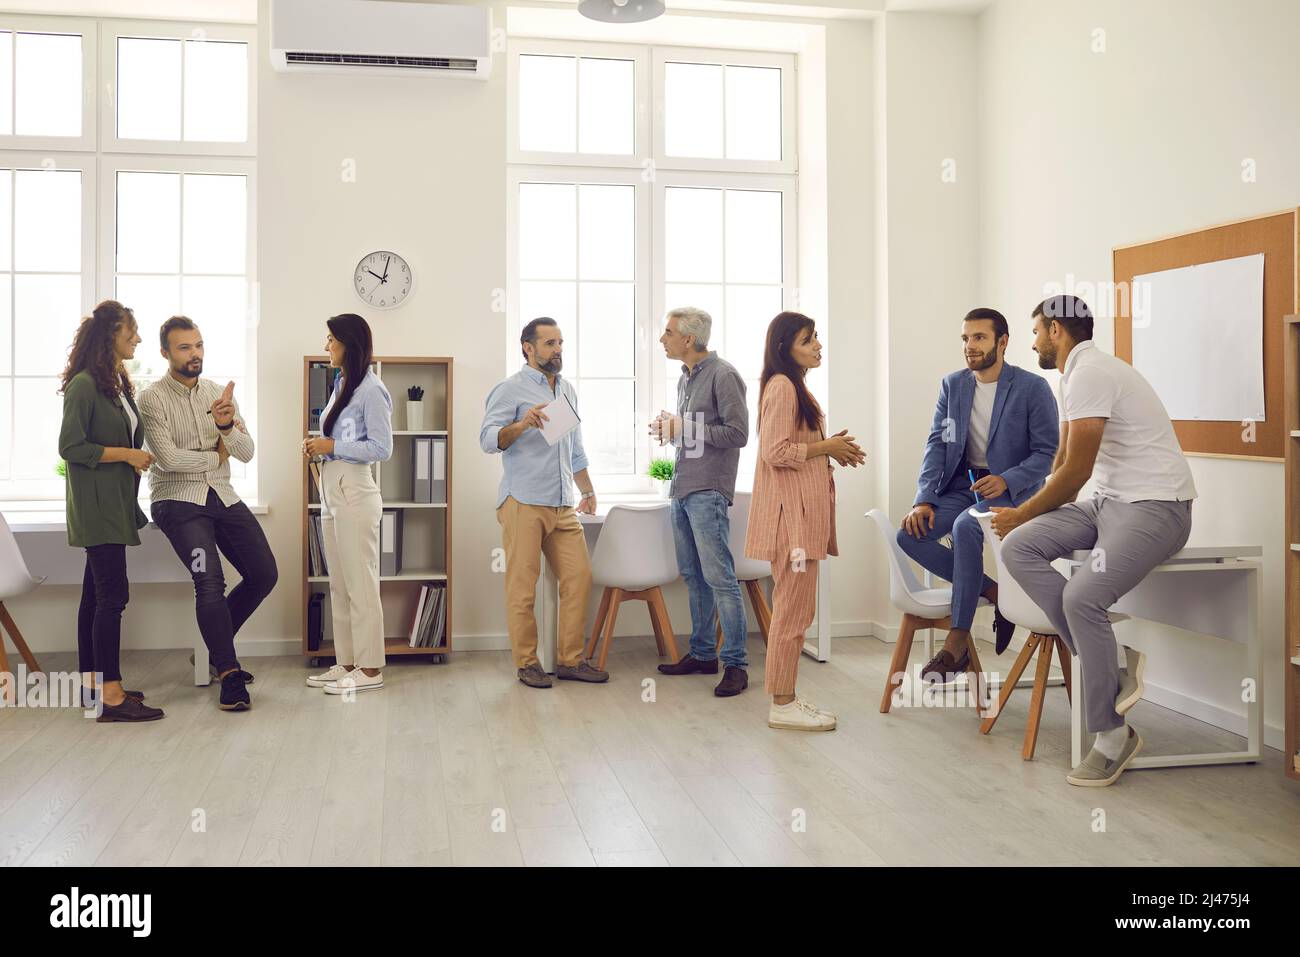 Groups of people gather in office during break at business conference or work meeting Stock Photo